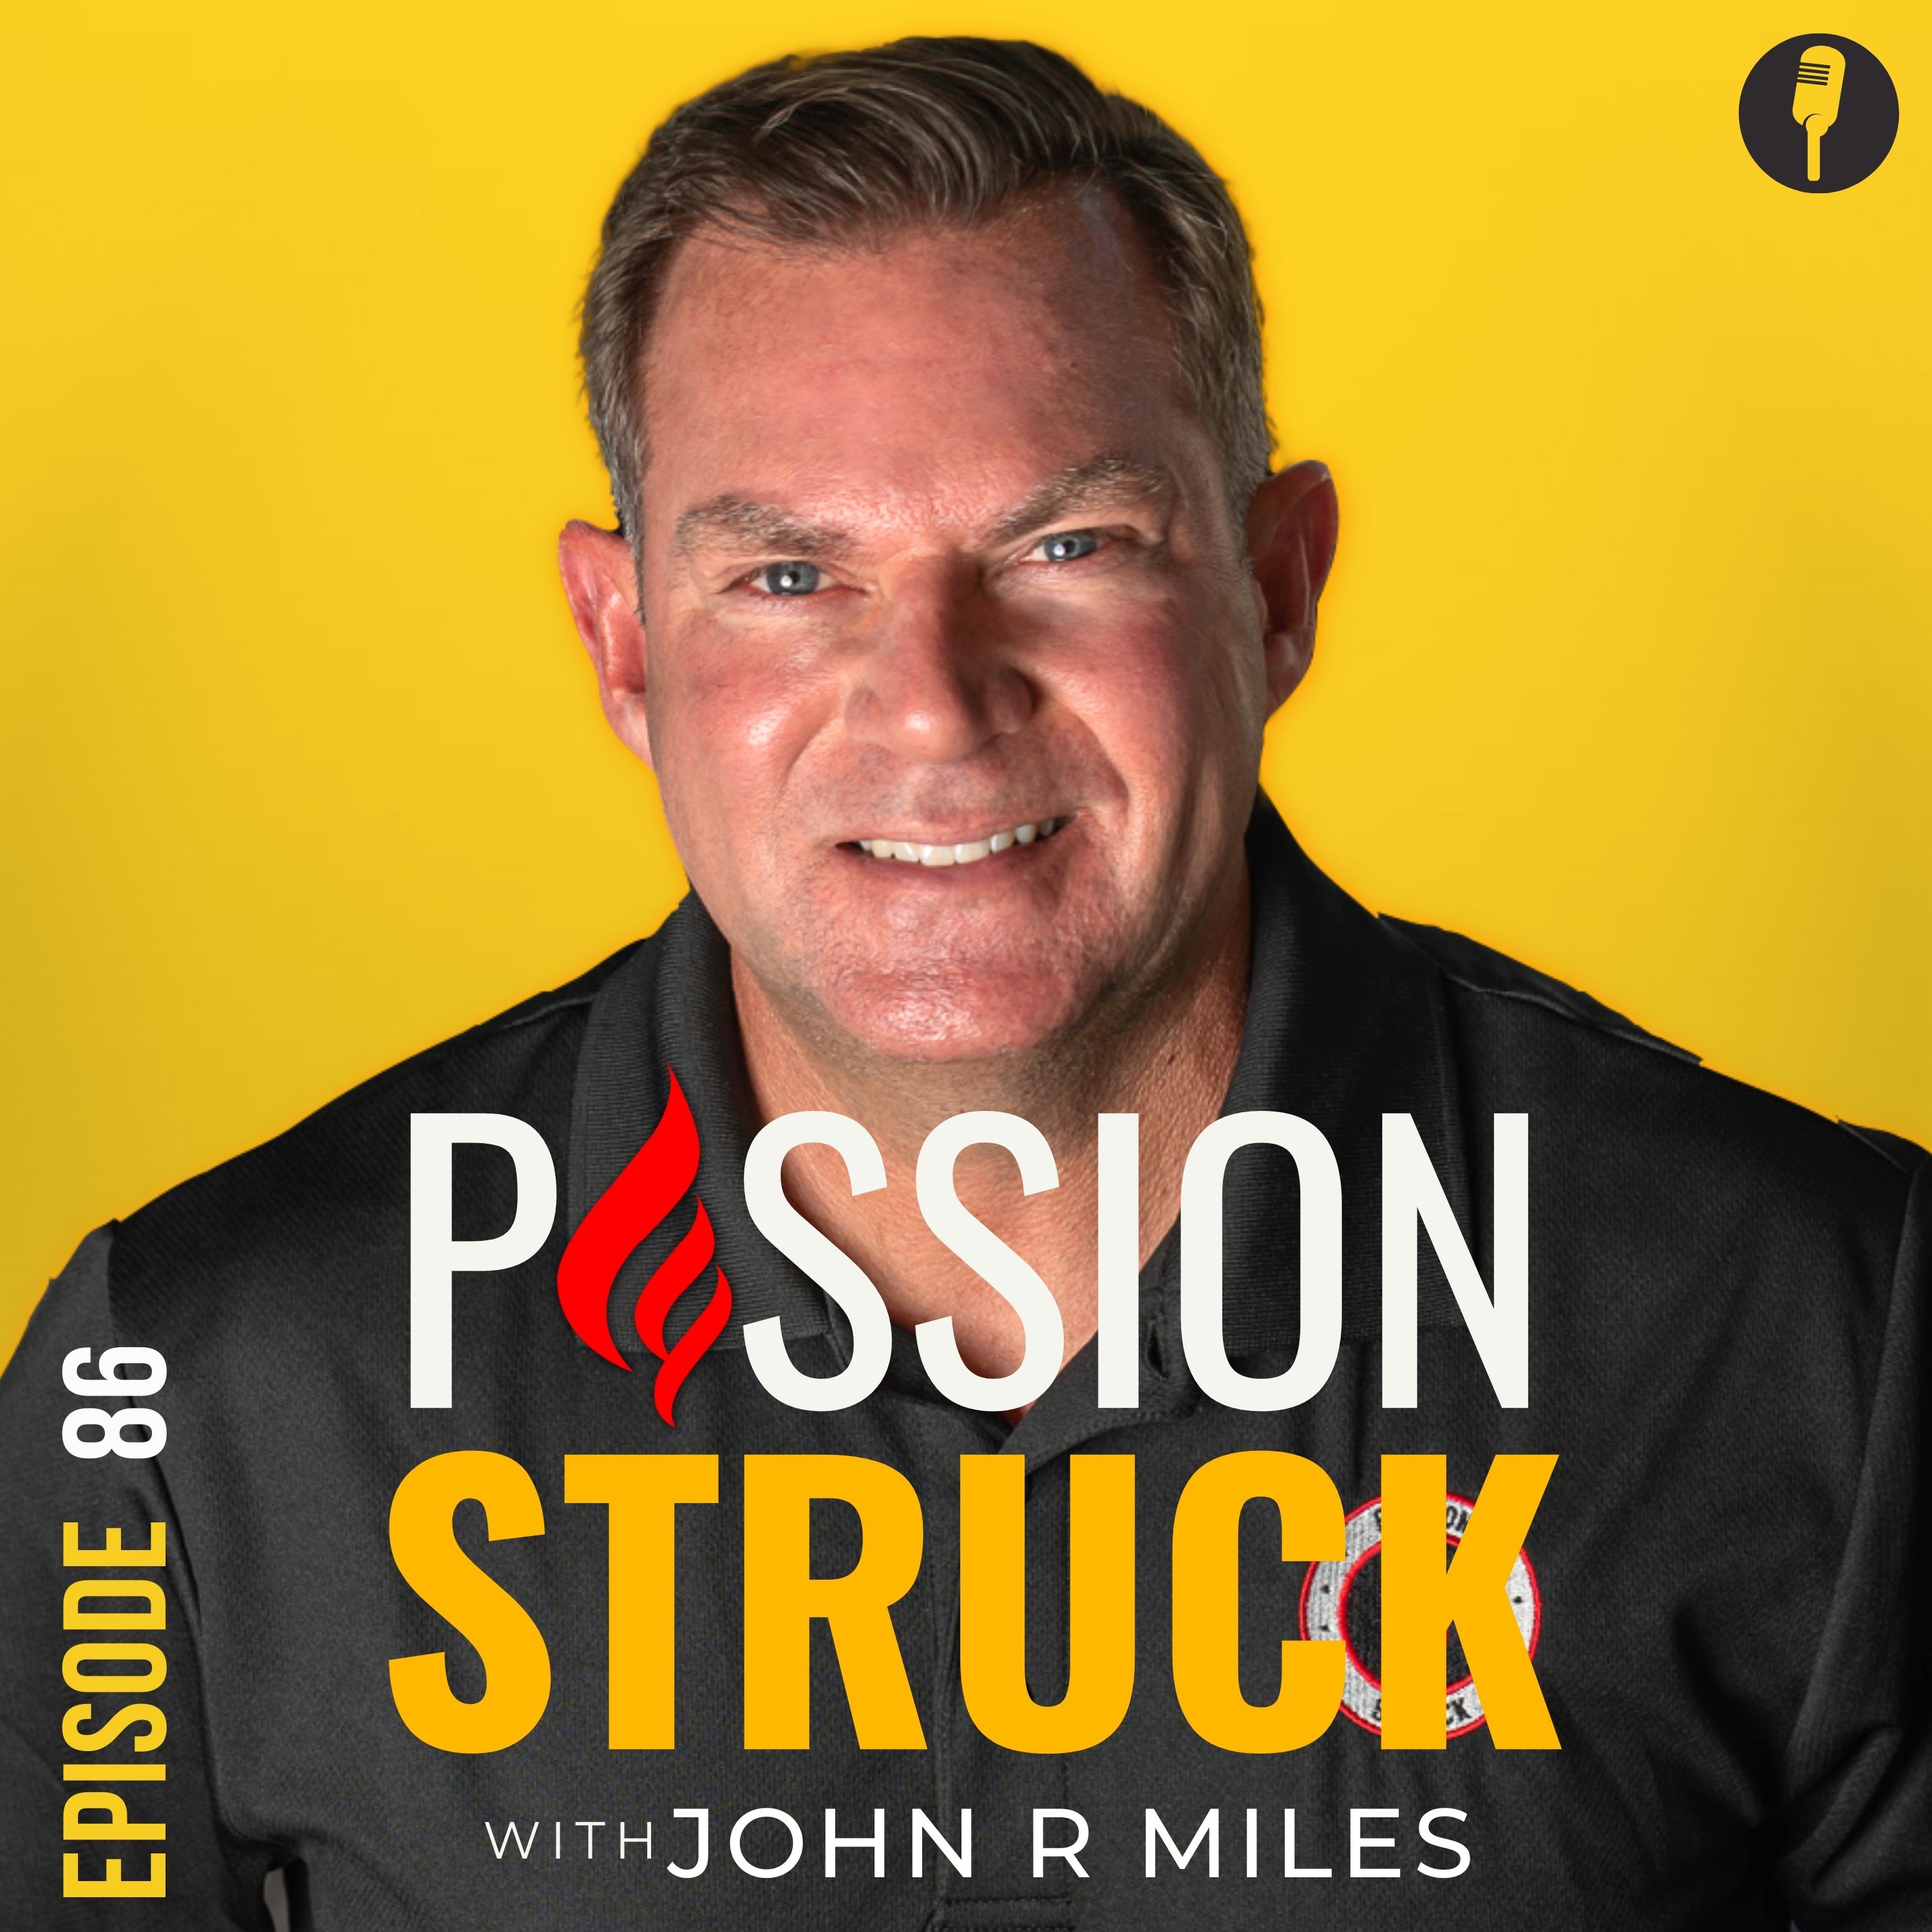 Passion Struck Podcast album cover with John R. Miles episode 86 on self-limiting beliefs